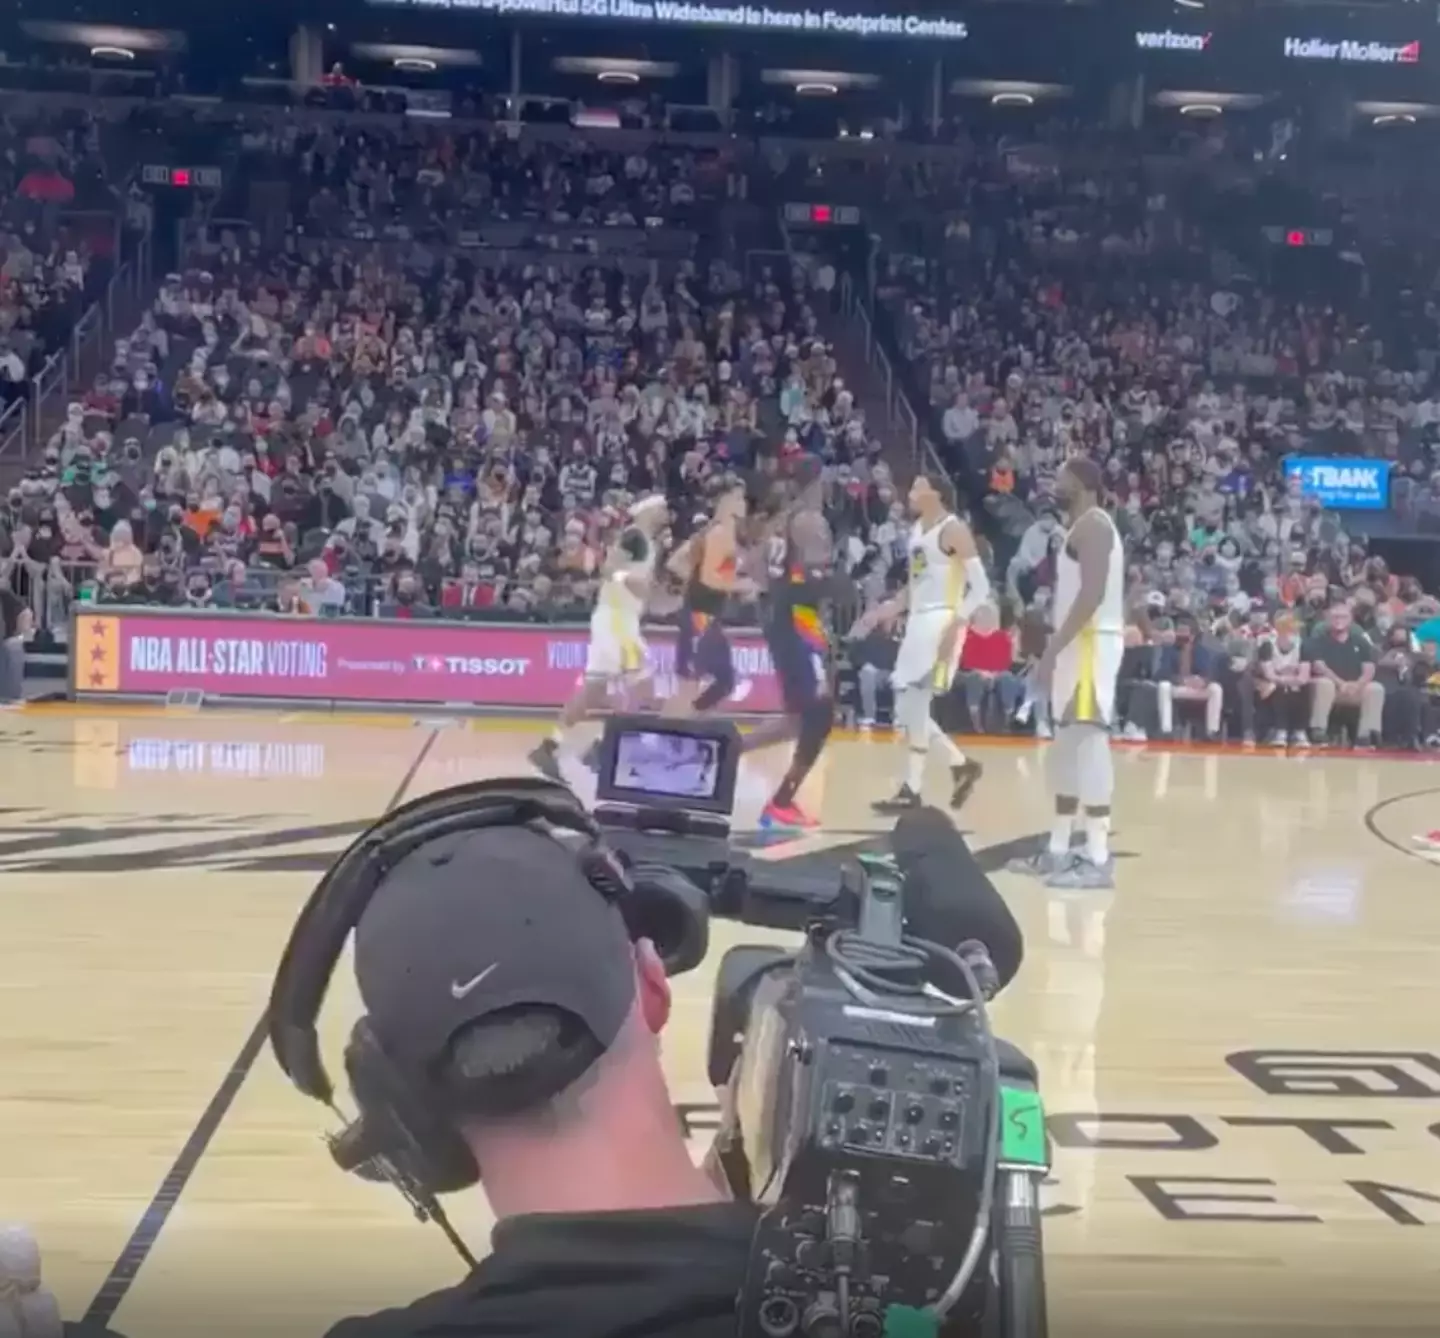 The NBA game has gone viral for its court side superstar.